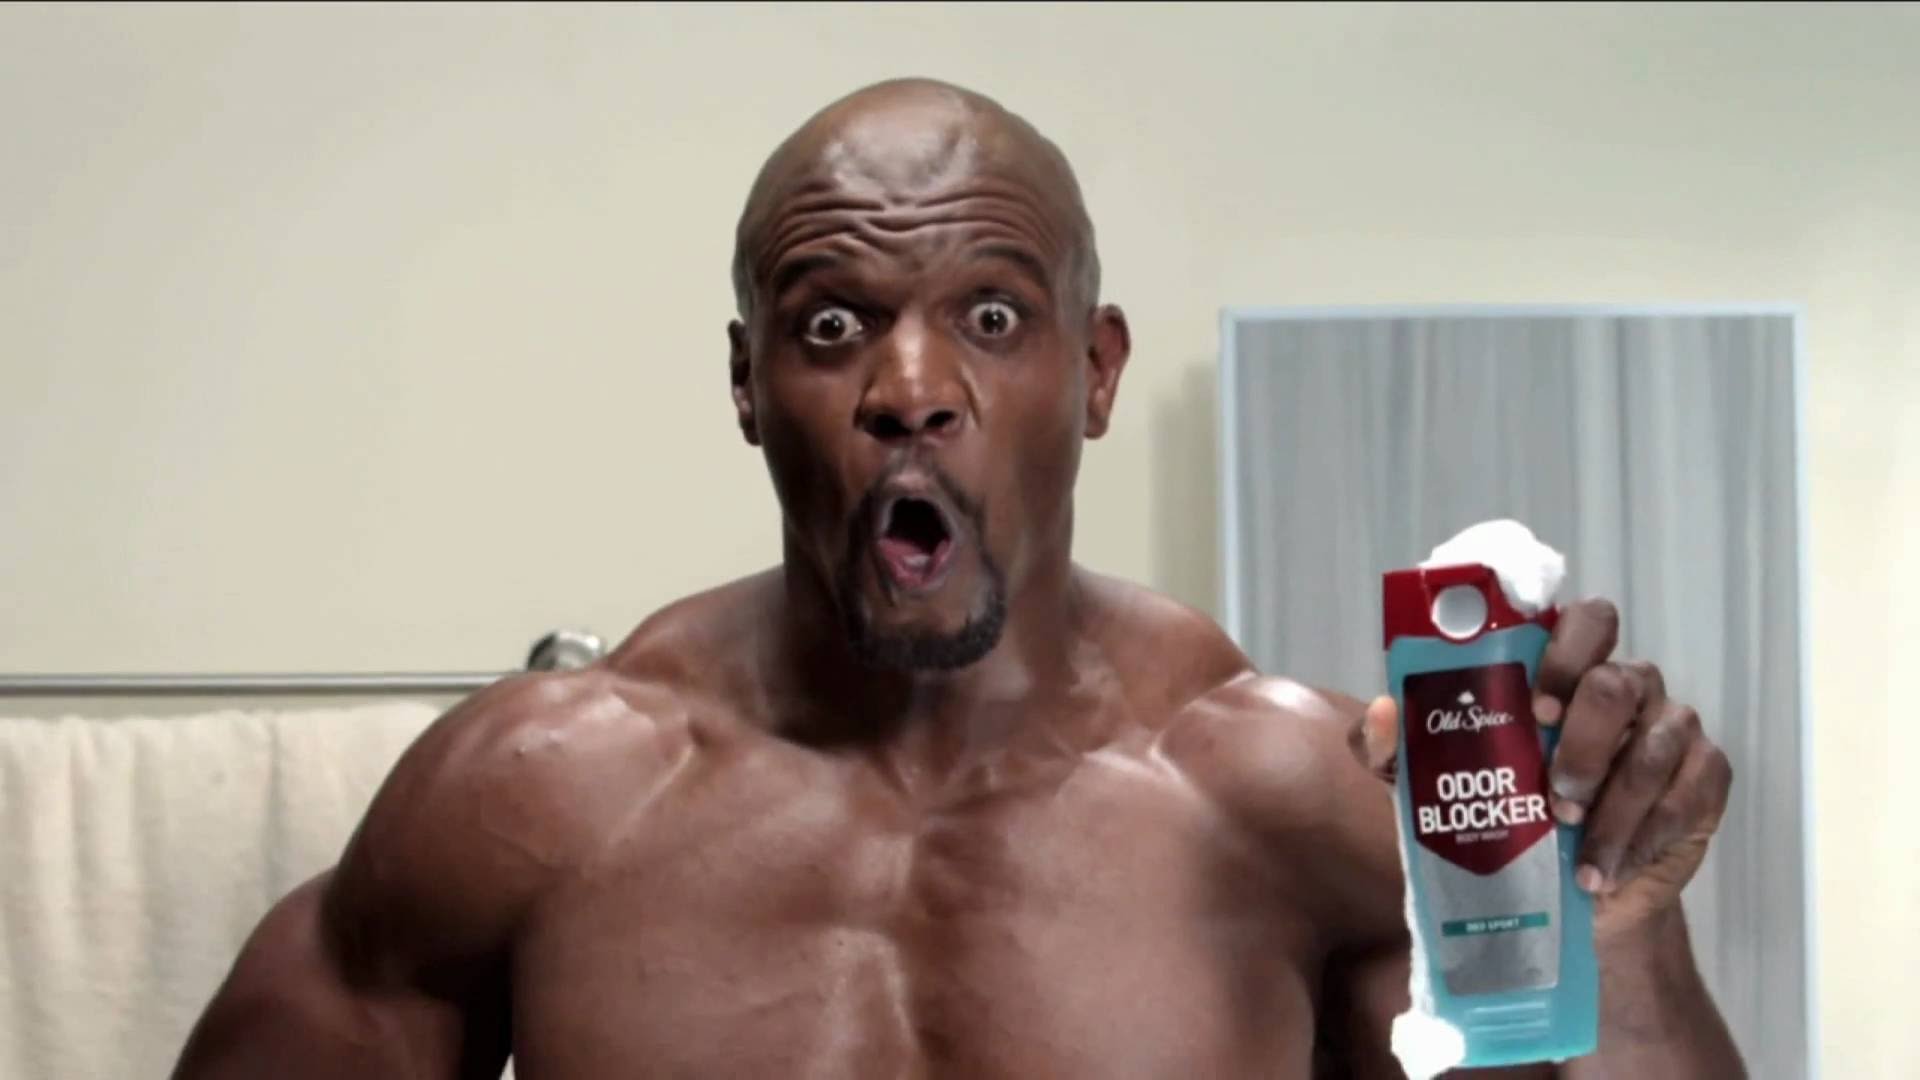 Terry Crews Old Spice Commercials [Full Collection] - YouTube